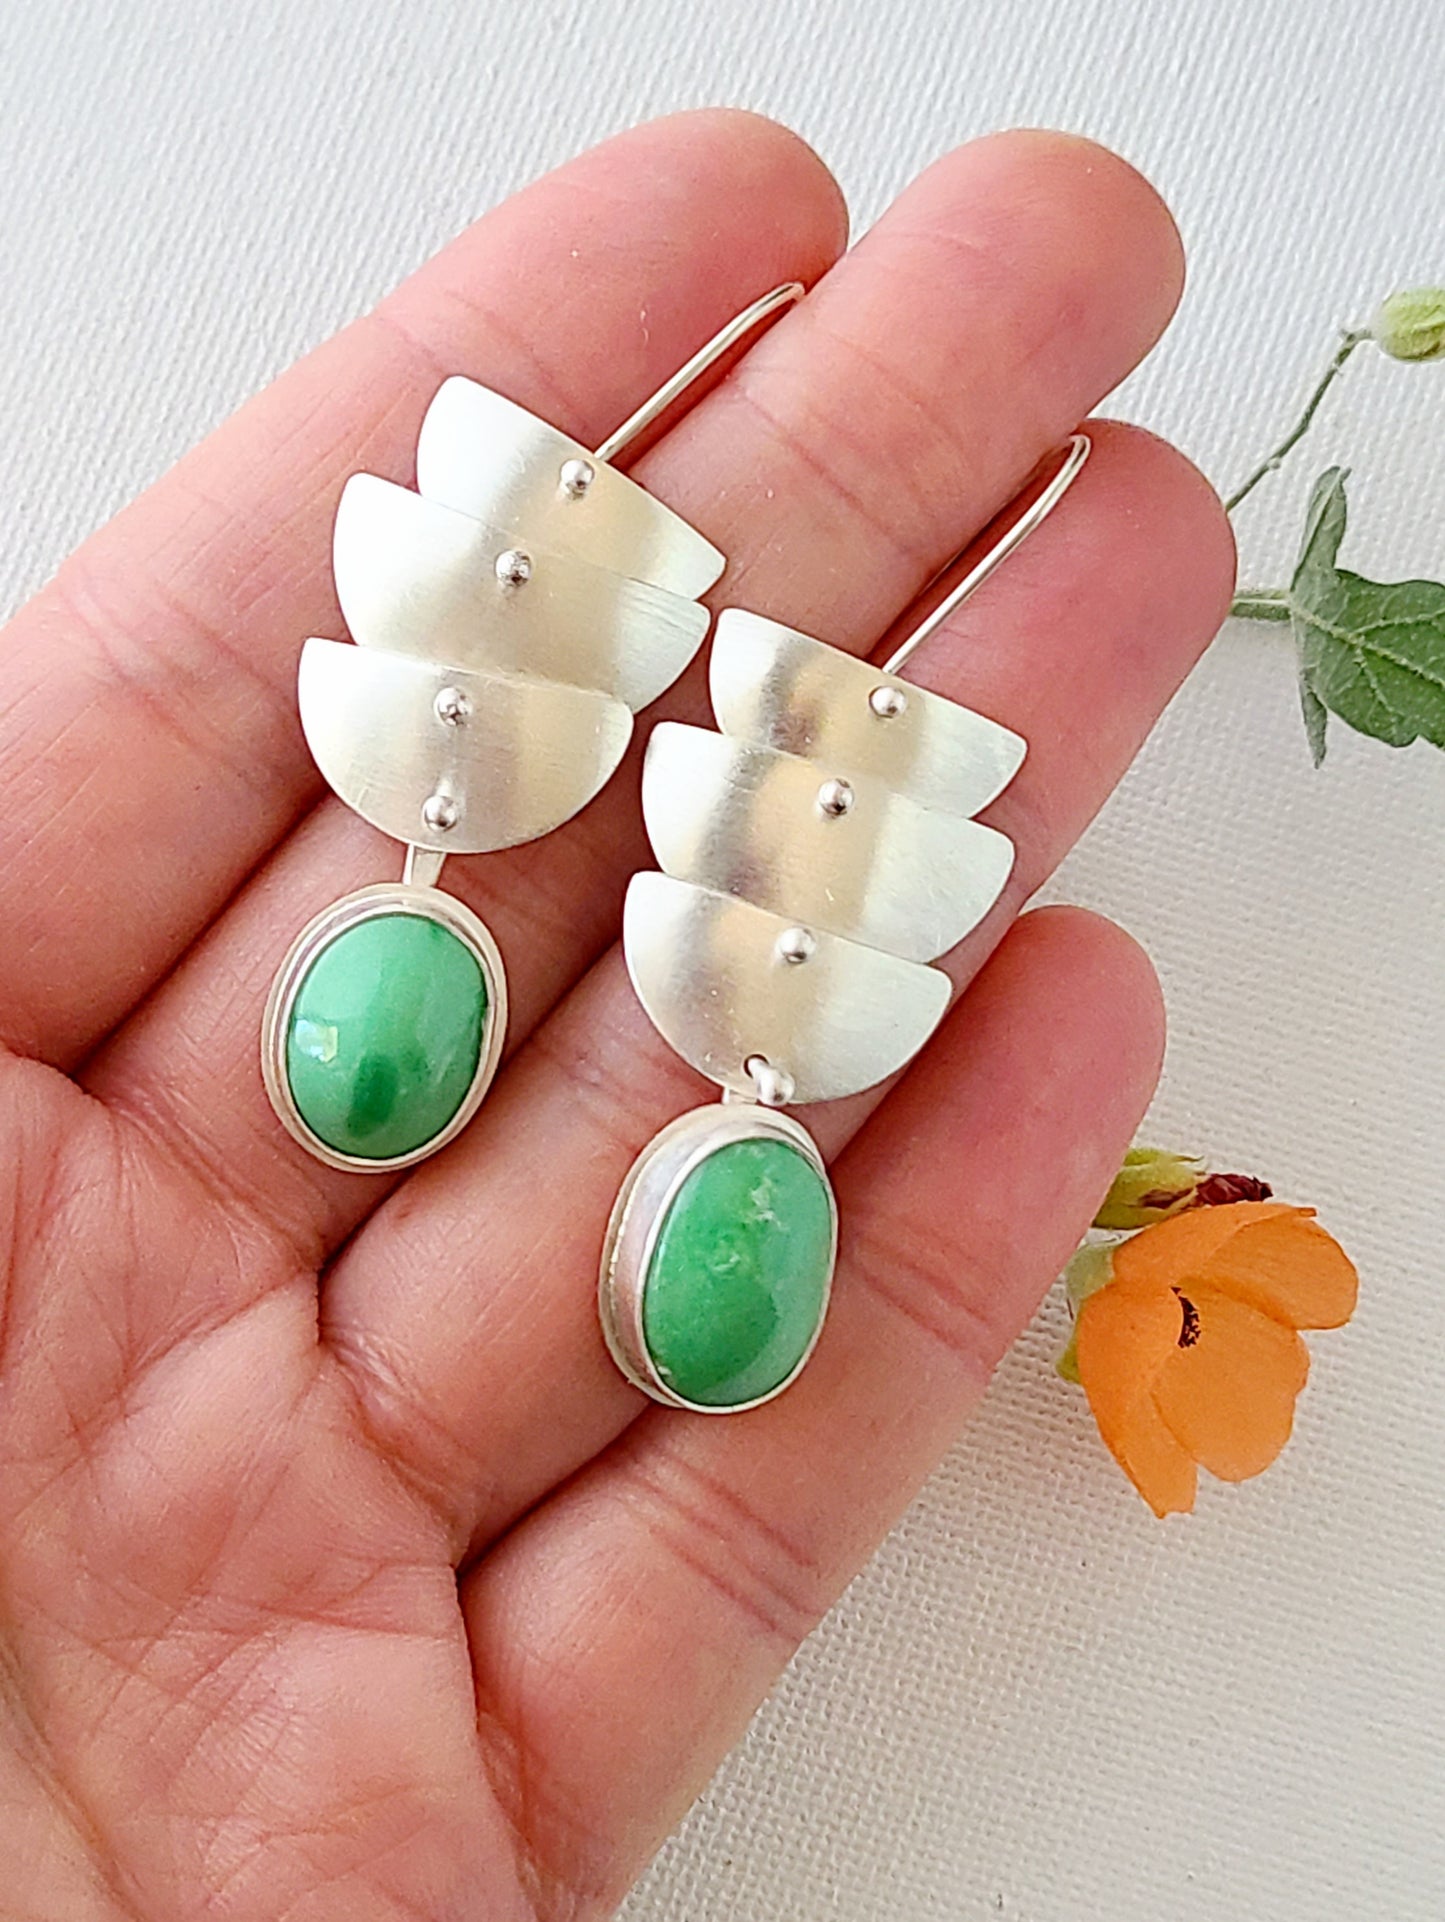 Fountain earrings with variscite